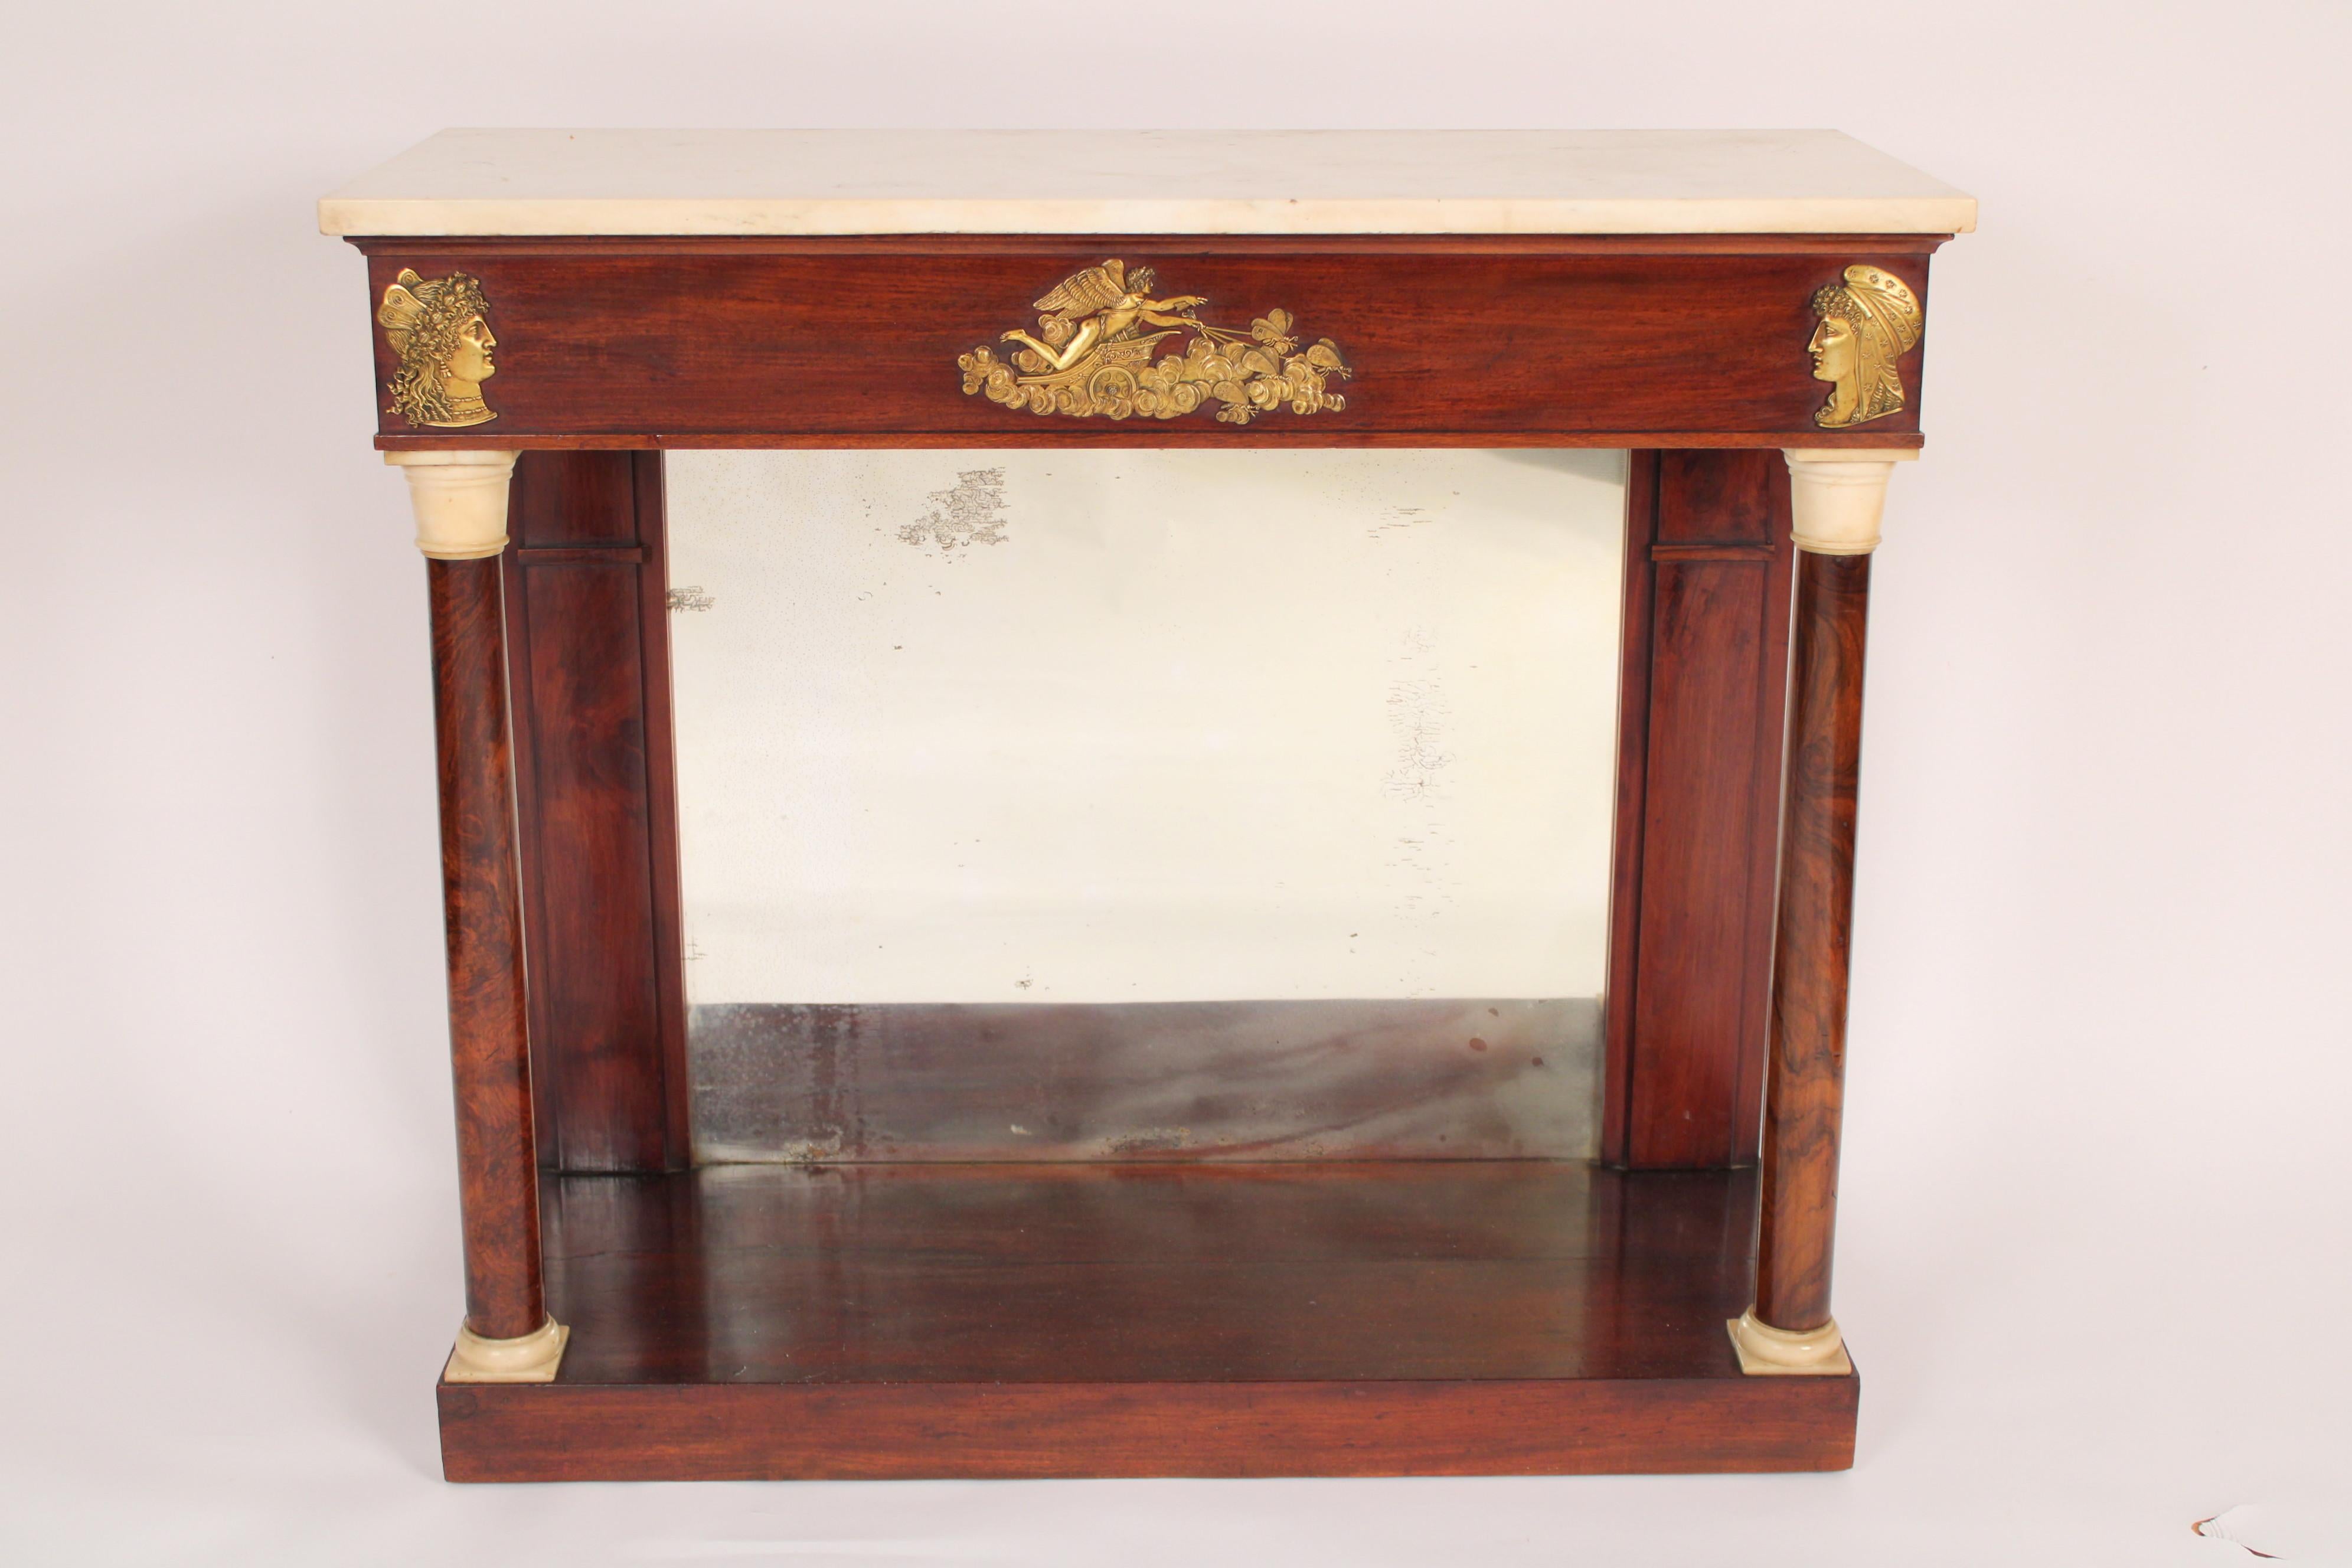 Antique Empire style mahogany console table with marble top, 19th century. With a rectangular Carrera marble top, a frieze with gilt bronze male and female faces in profile on either side of a gilt bronze plaque of an angel riding a chariot in the